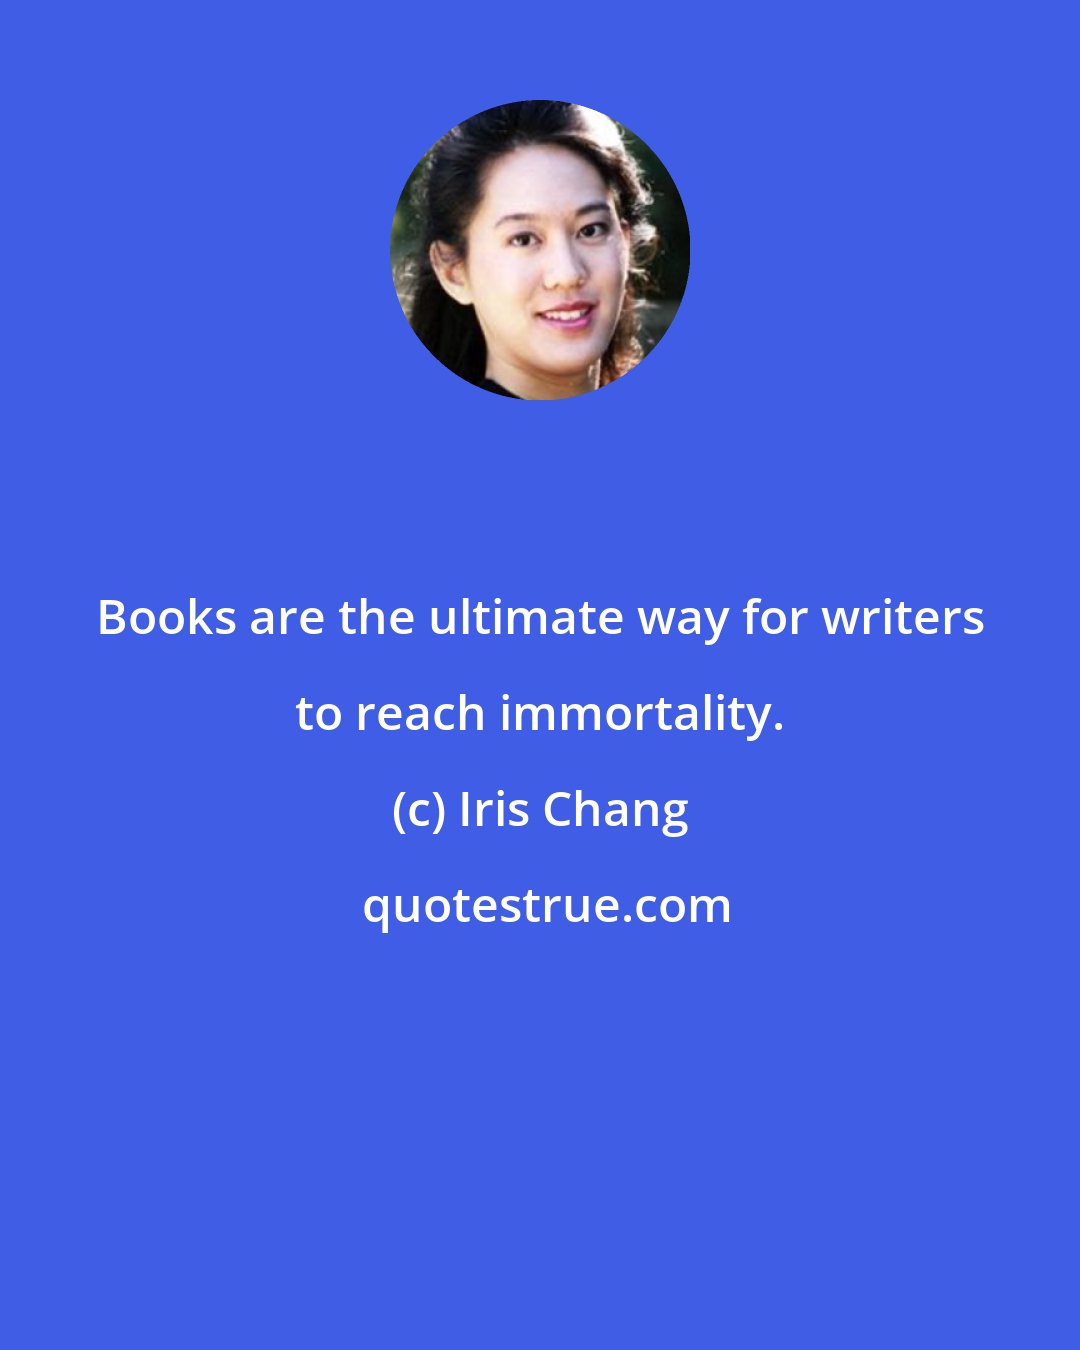 Iris Chang: Books are the ultimate way for writers to reach immortality.